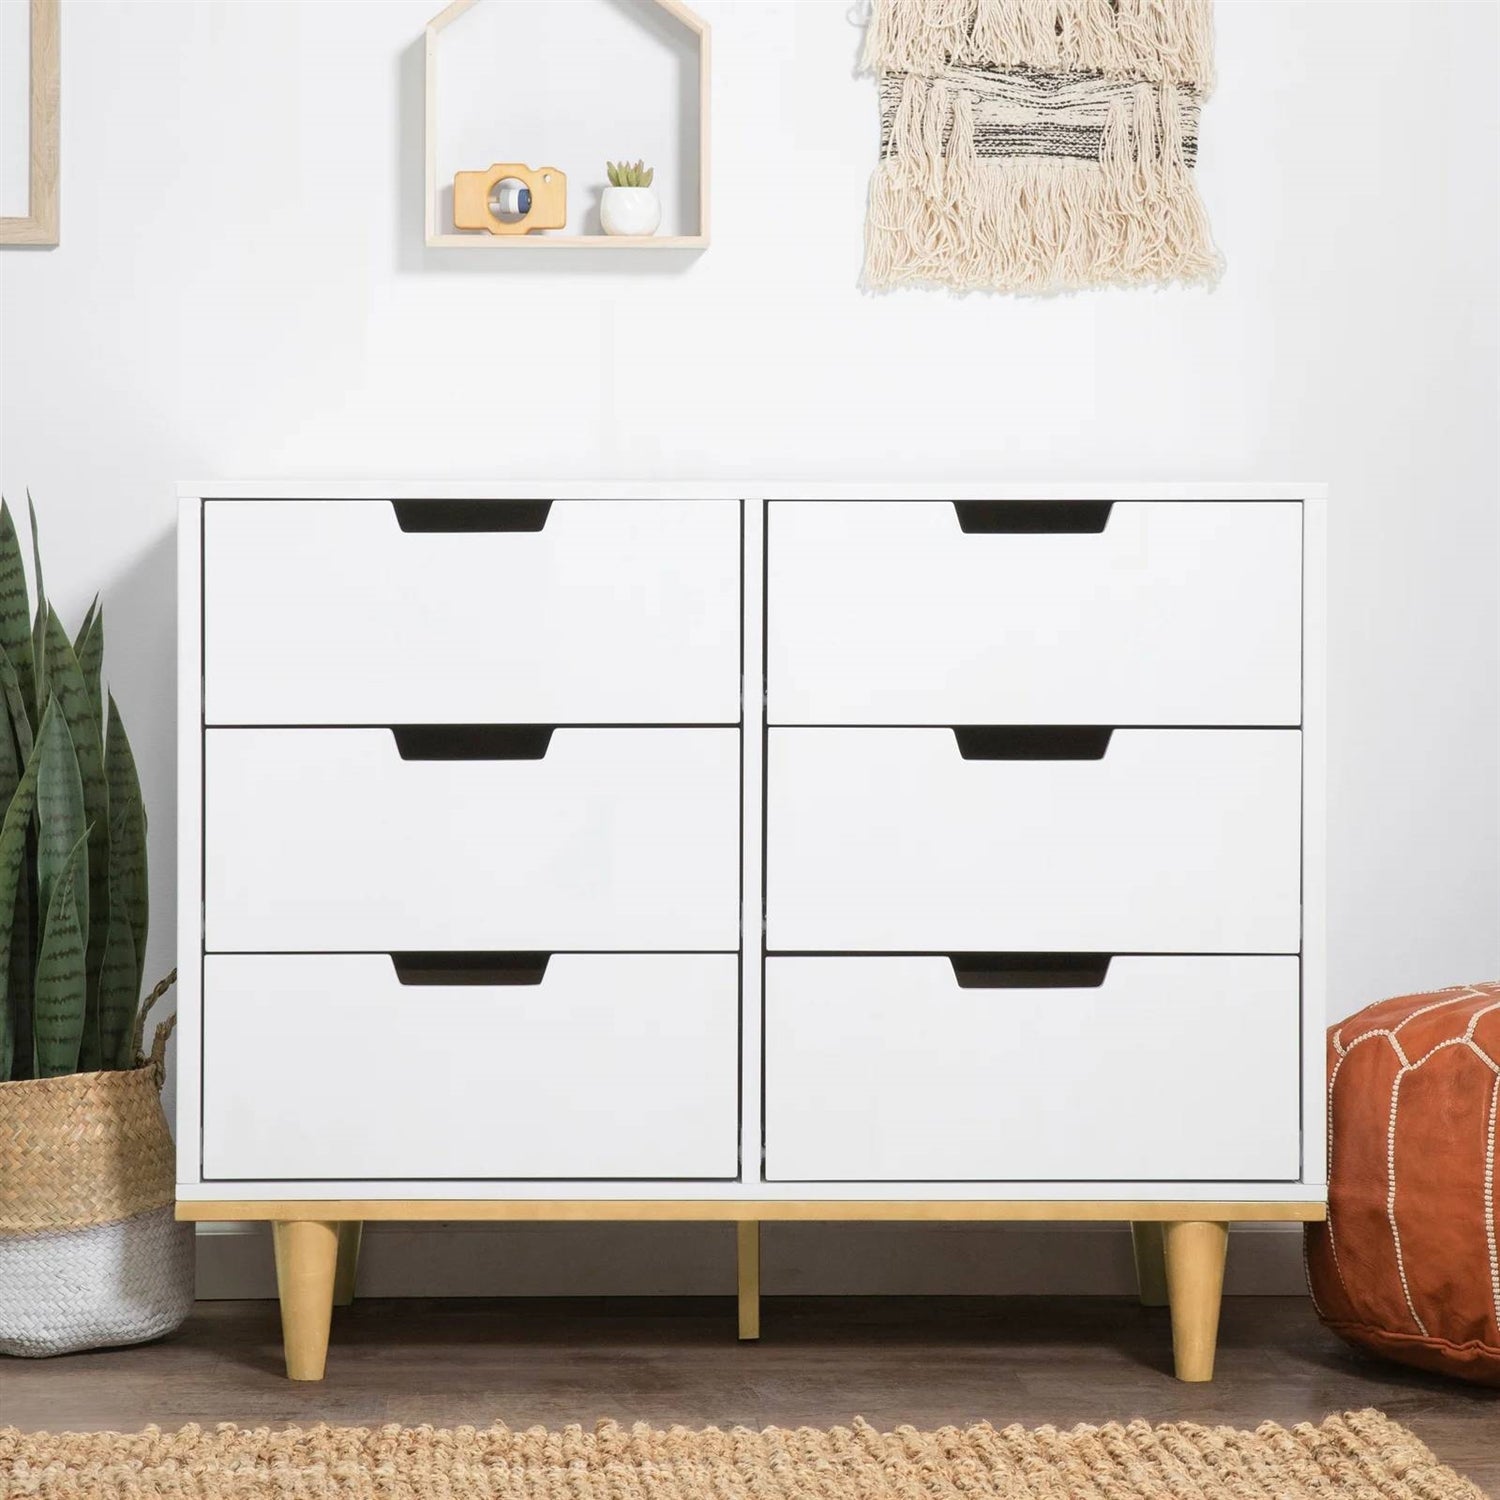 Bedroom > Nightstand And Dressers - Modern Mid-Century Style 6-Drawer Double Dresser In White Natural Wood Finish